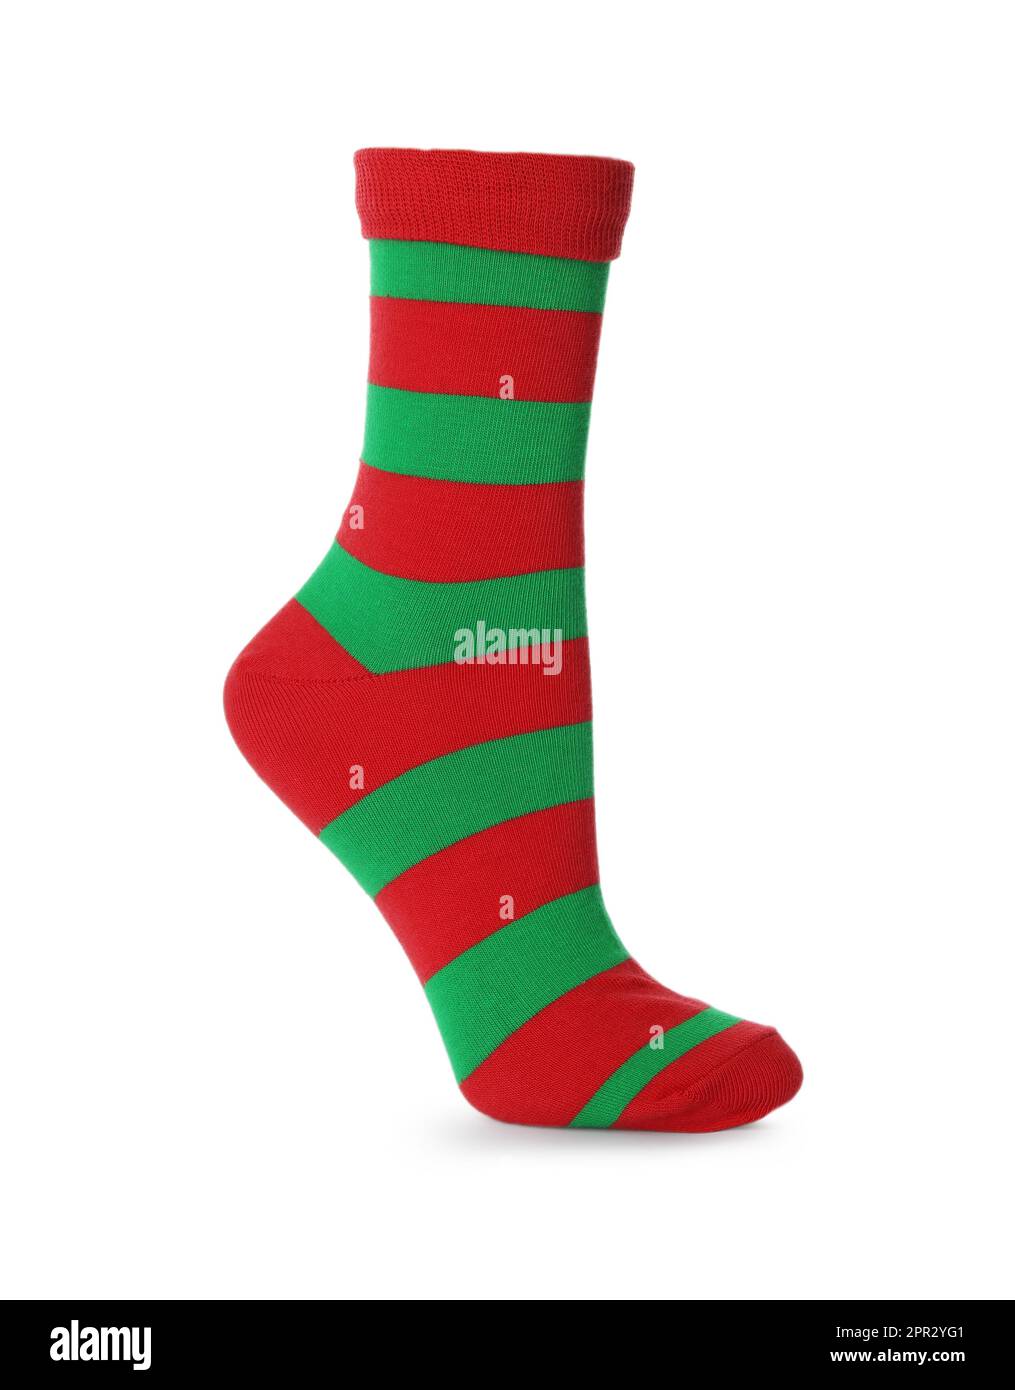 One red and green striped sock isolated on white Stock Photo